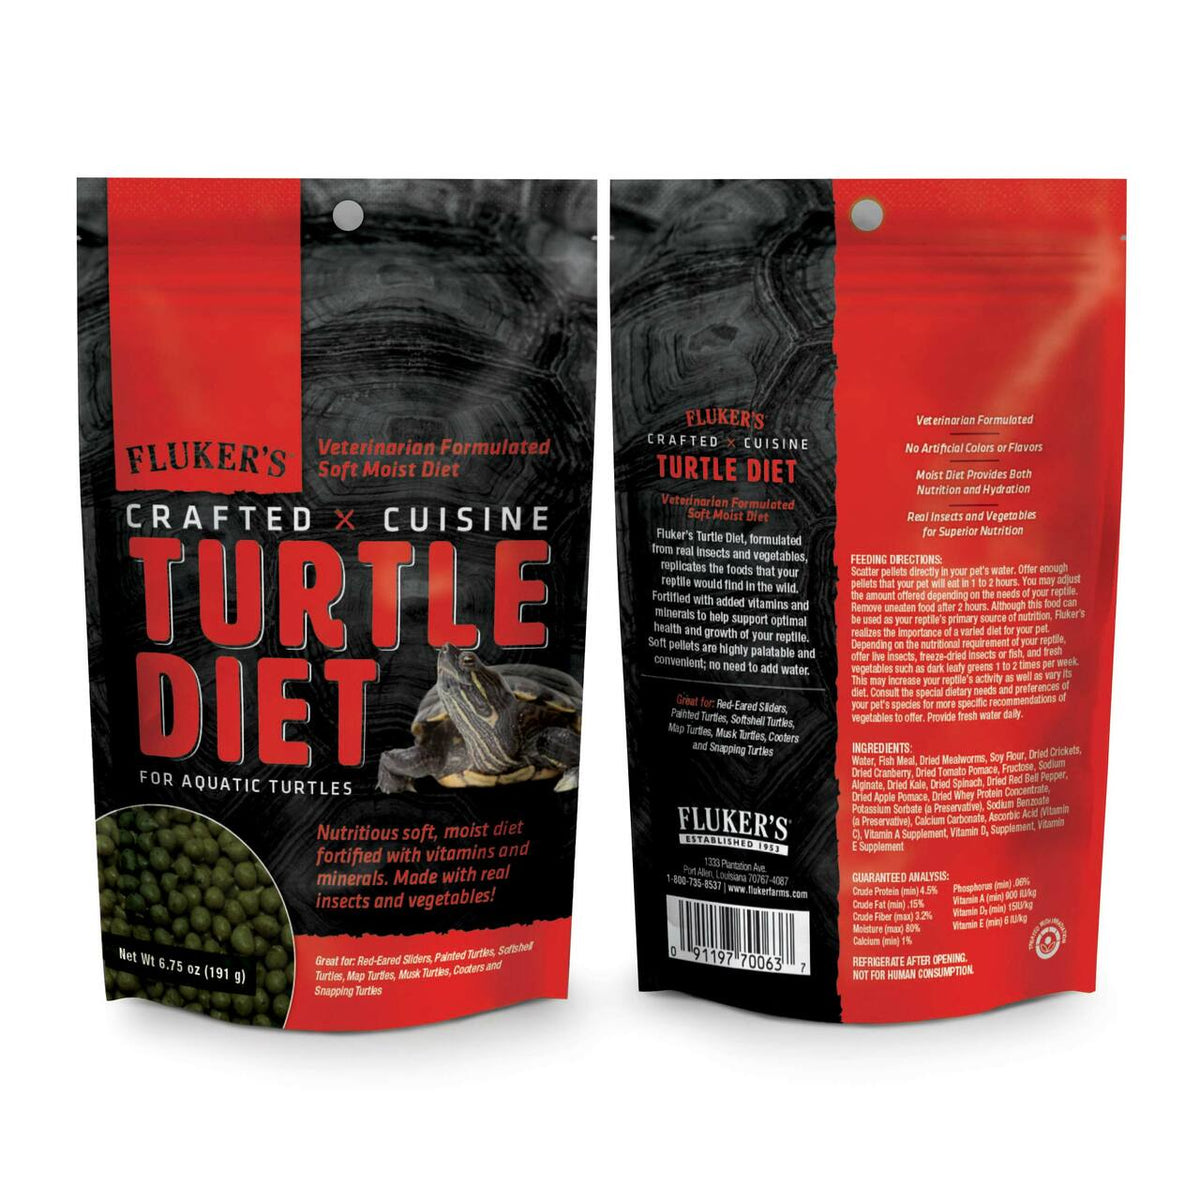 Flukers Crafted Cuisine Turtle Diet